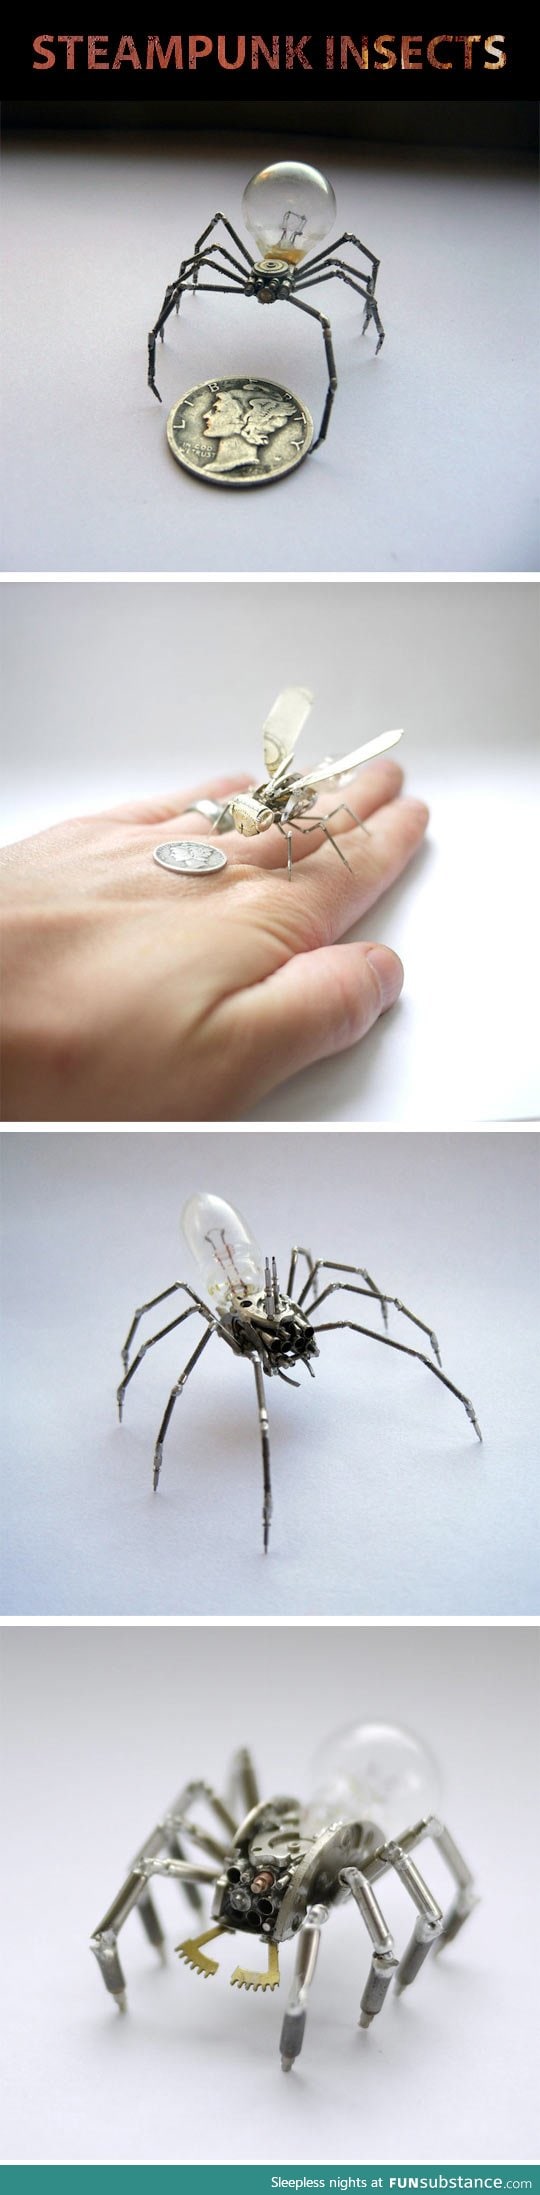 Tiny mechanical insects made out of watch parts